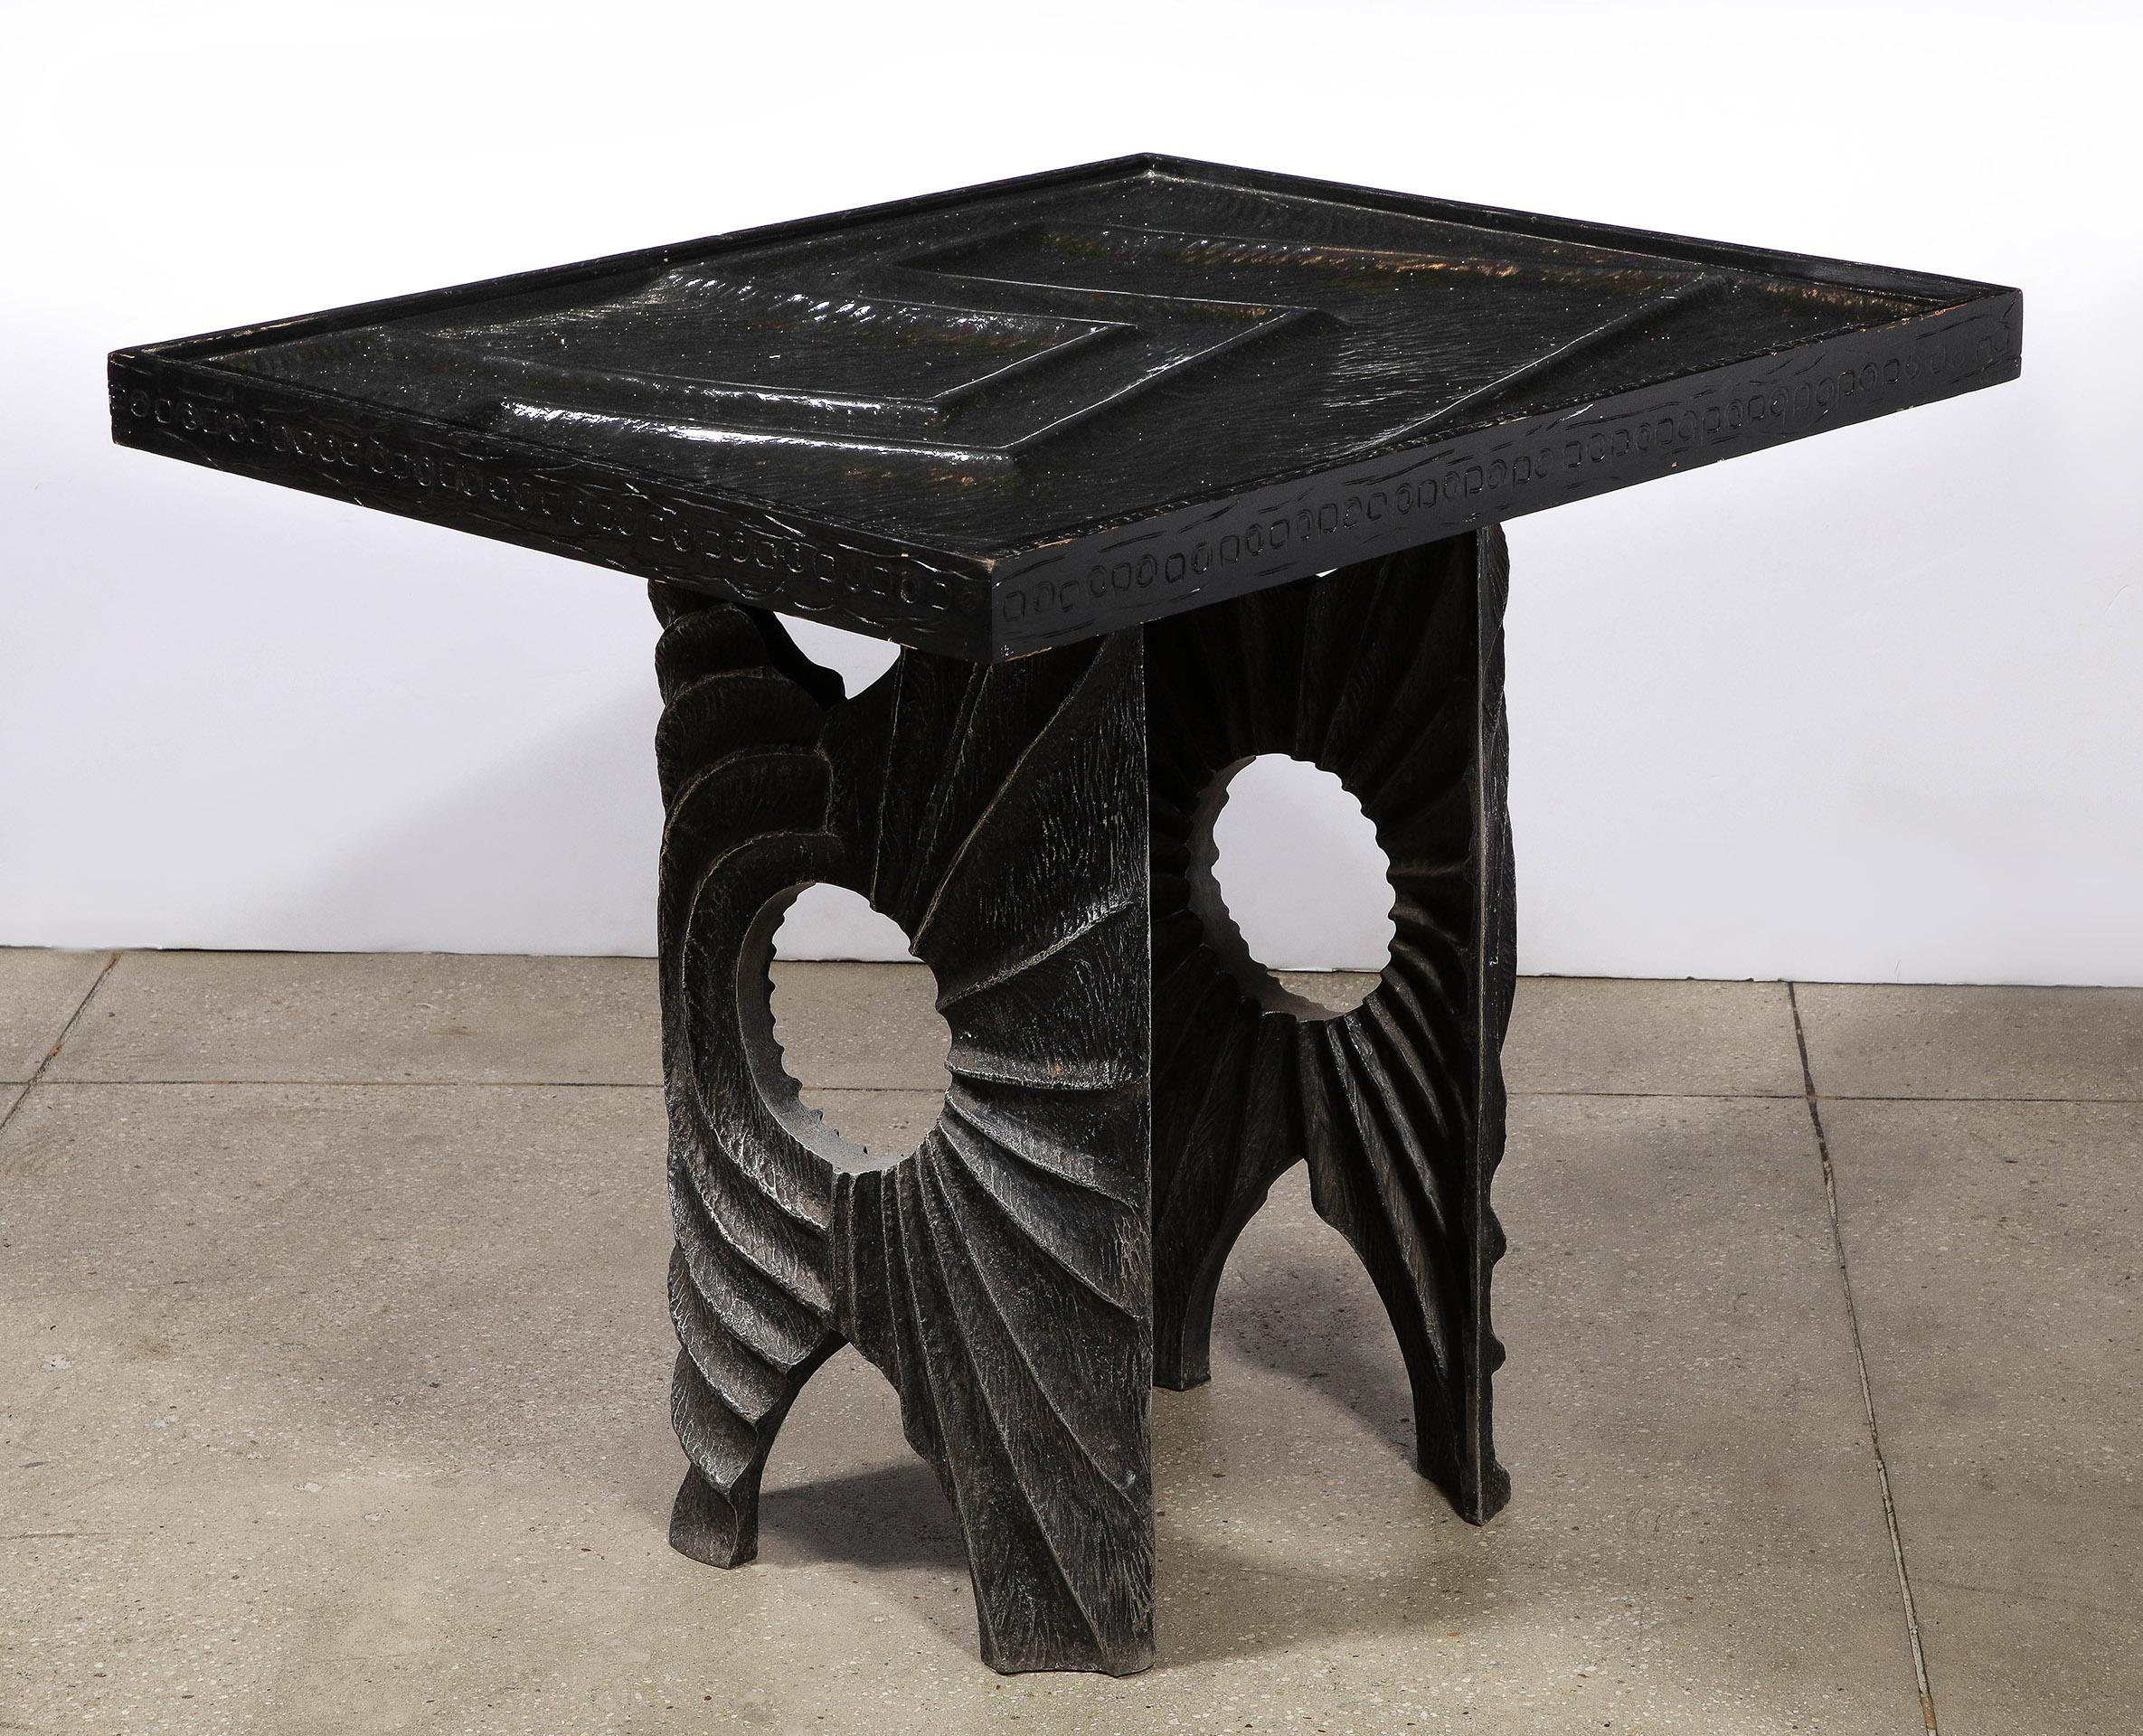 The unique sculpted aluminum table with abstract geometric chasing, supporting a black lacquered carved wood top.